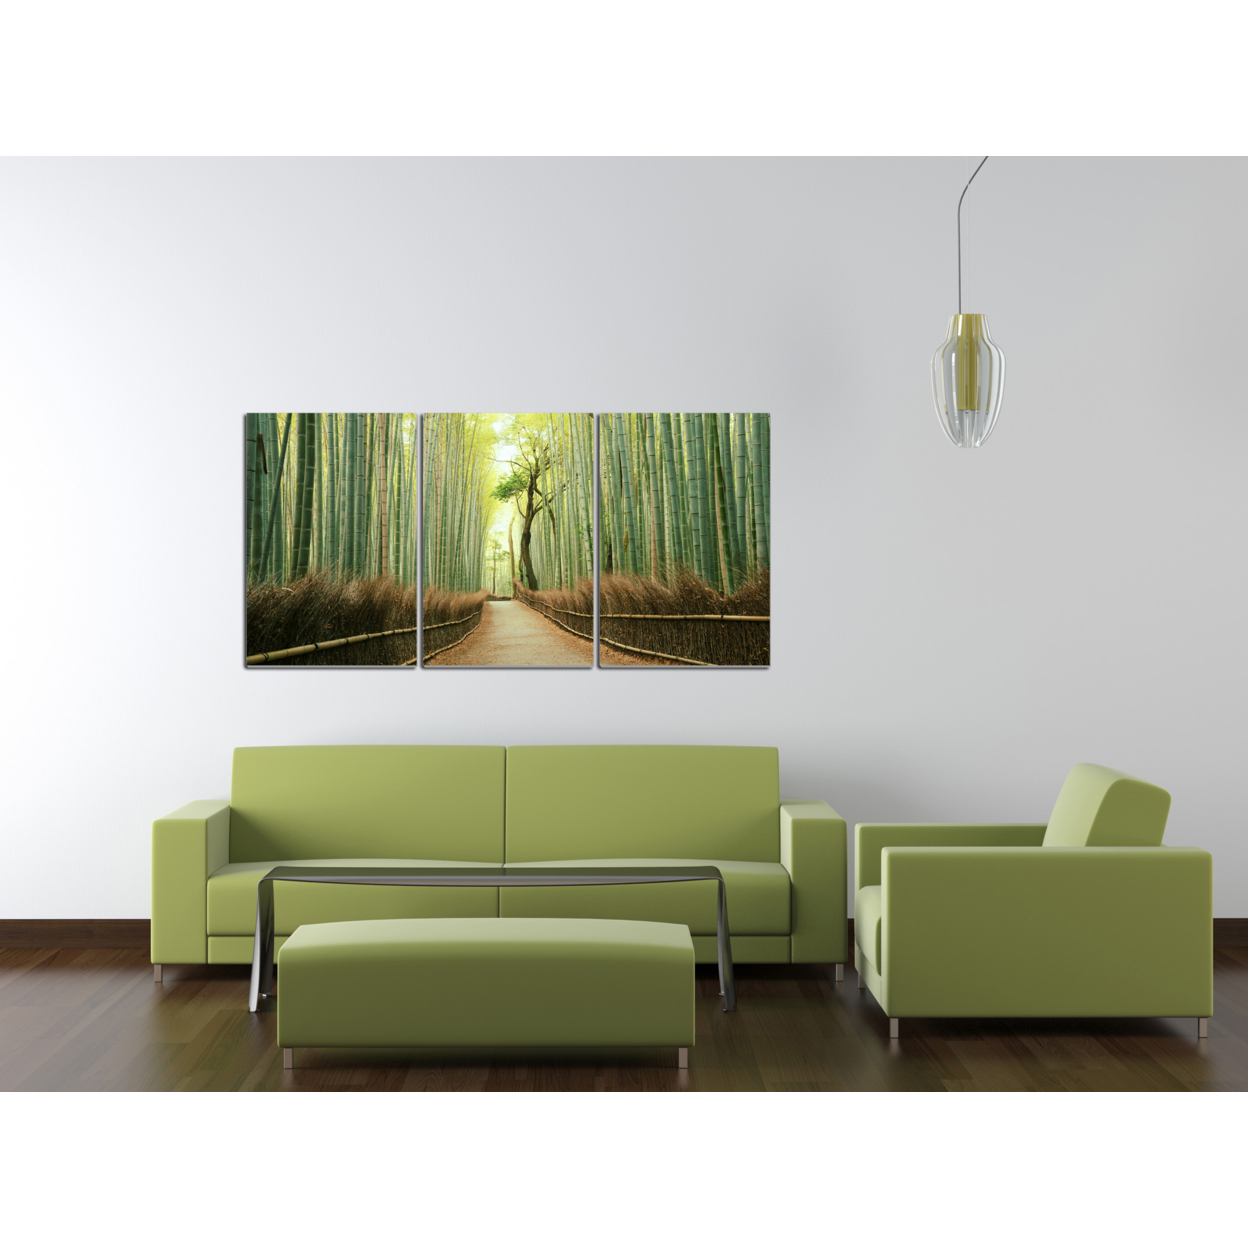 Pine Road 3 Piece Wrapped Canvas Wall Art Print 20x40.5 Inches